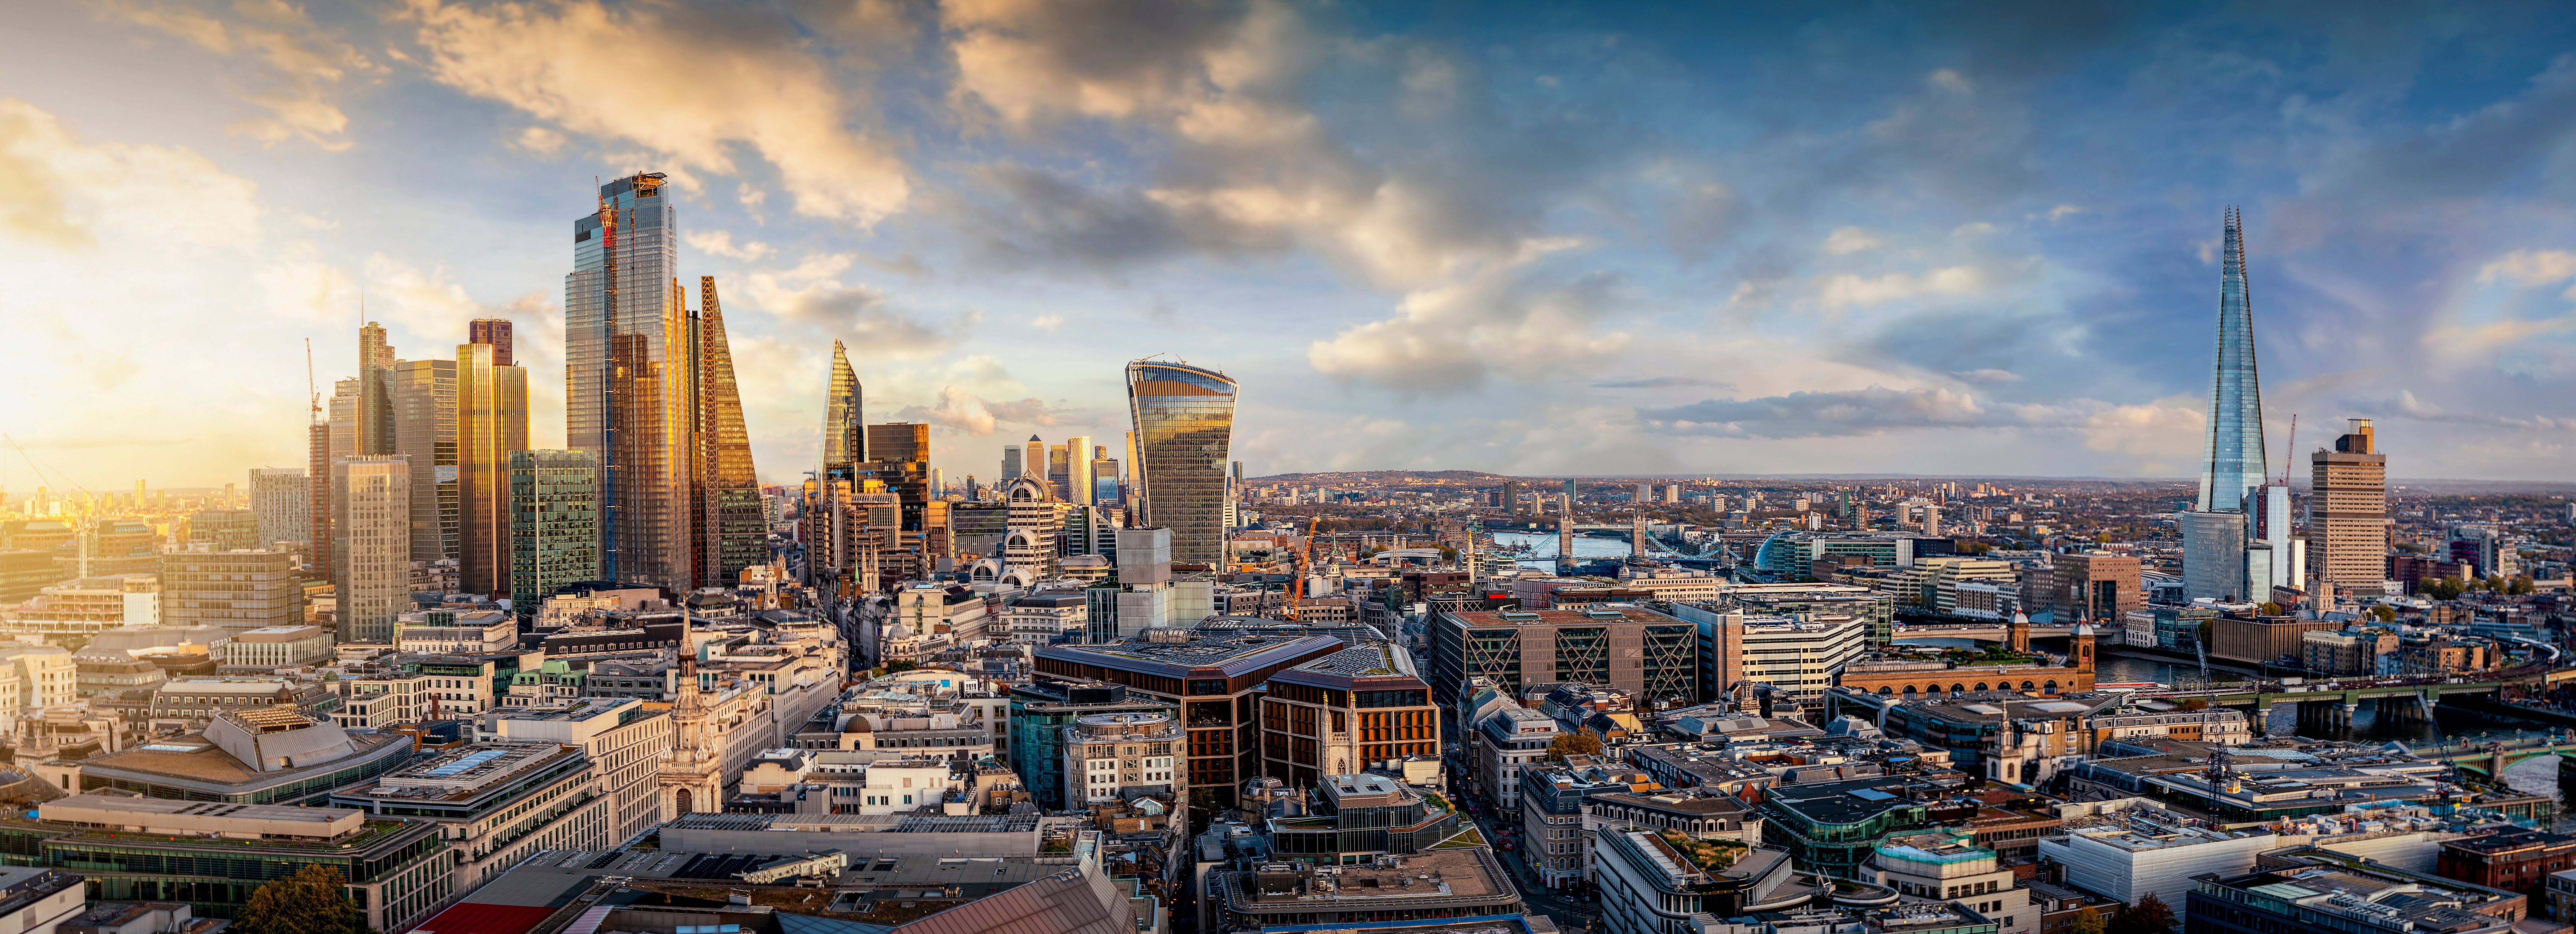 The skyline of London, United Kingdom, during sunset time